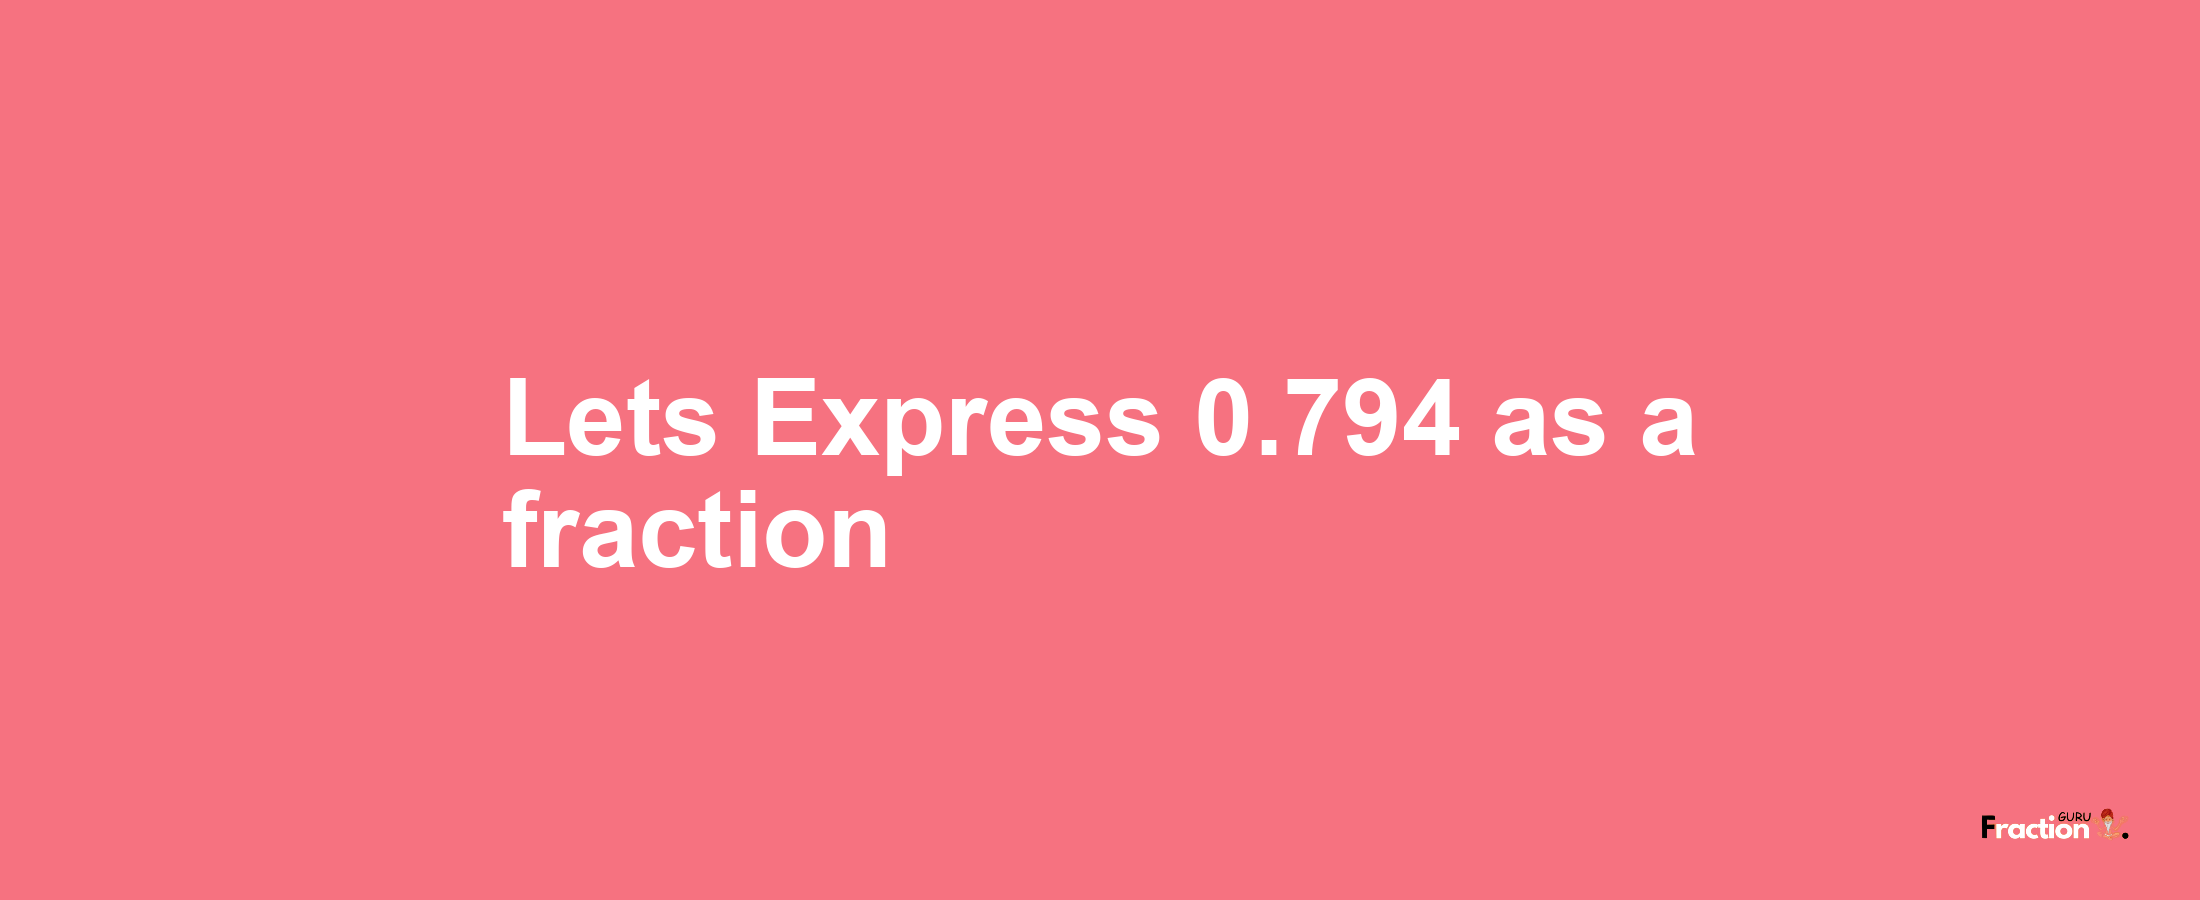 Lets Express 0.794 as afraction